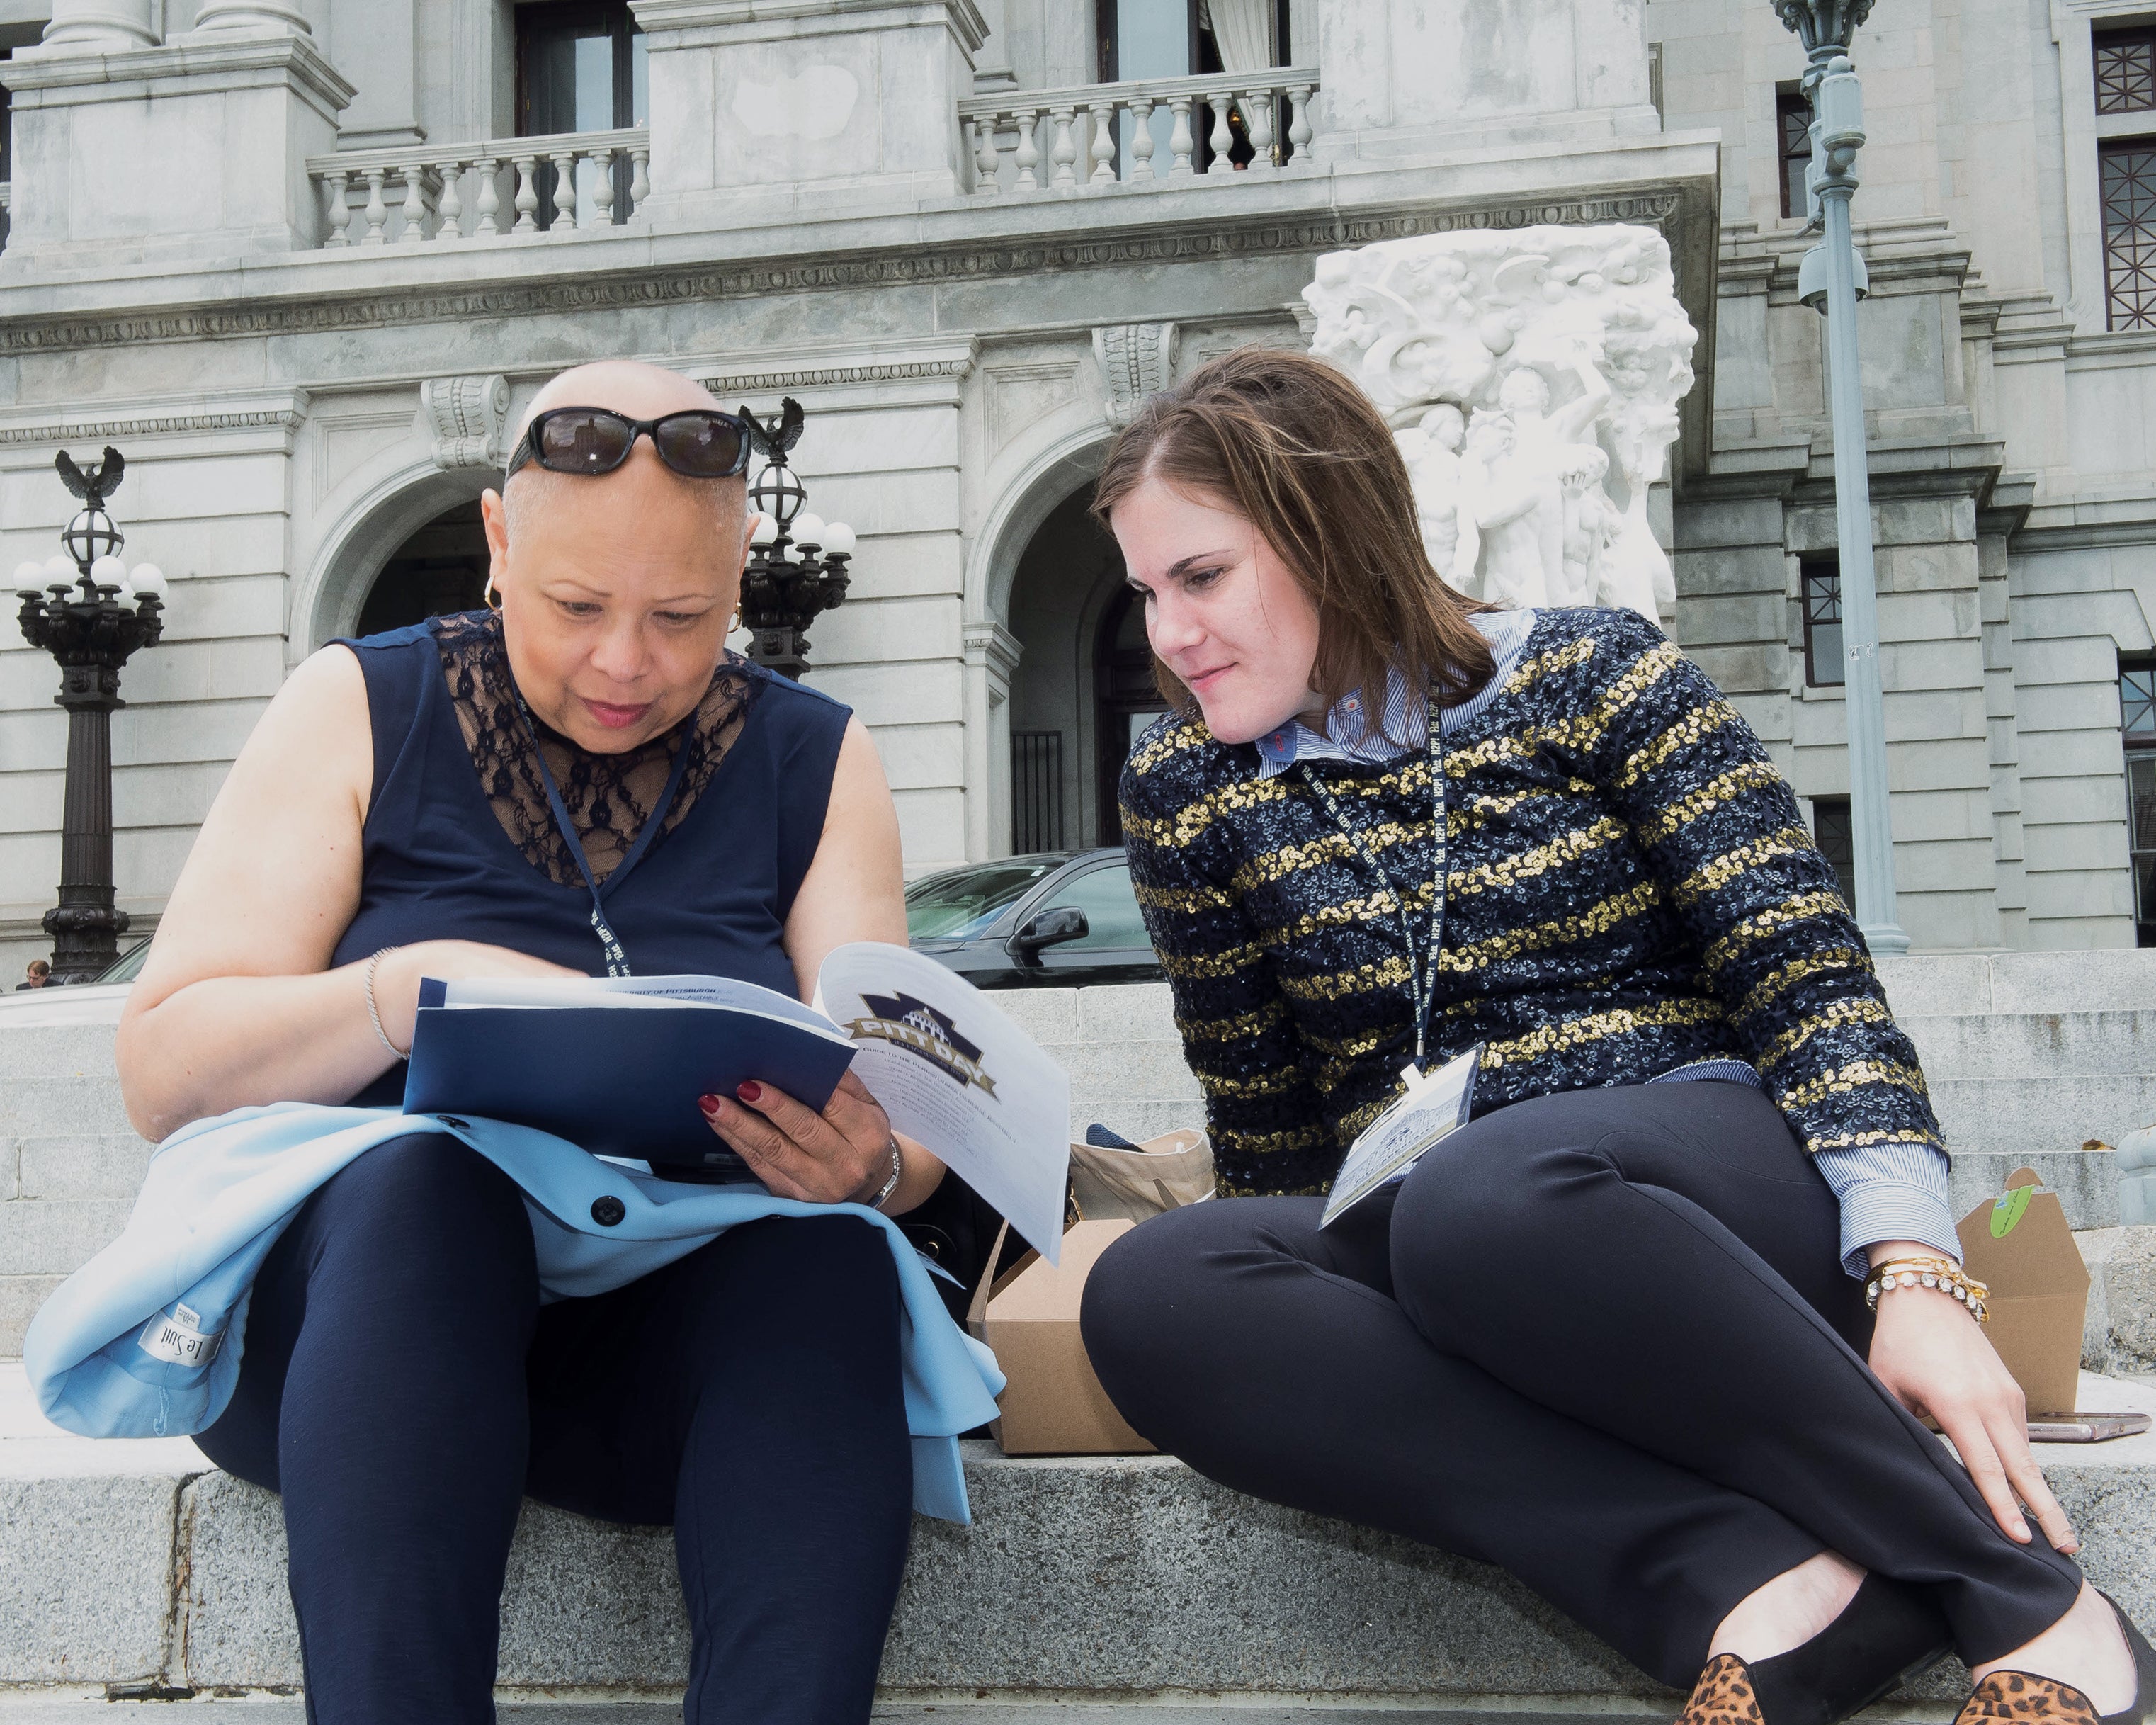 Camille Burgess (CGS ’12) (left) and Victoria Ivock (UPJ ’17) reviewed materials on the steps of the Pennsylvania State Capitol building before speaking to lawmakers during the 2018 Pitt Day in Harrisburg. The annual day of advocacy connects legislators with Pitt alumni, faculty, staff, and students who share the many ways Pitt makes an impact.